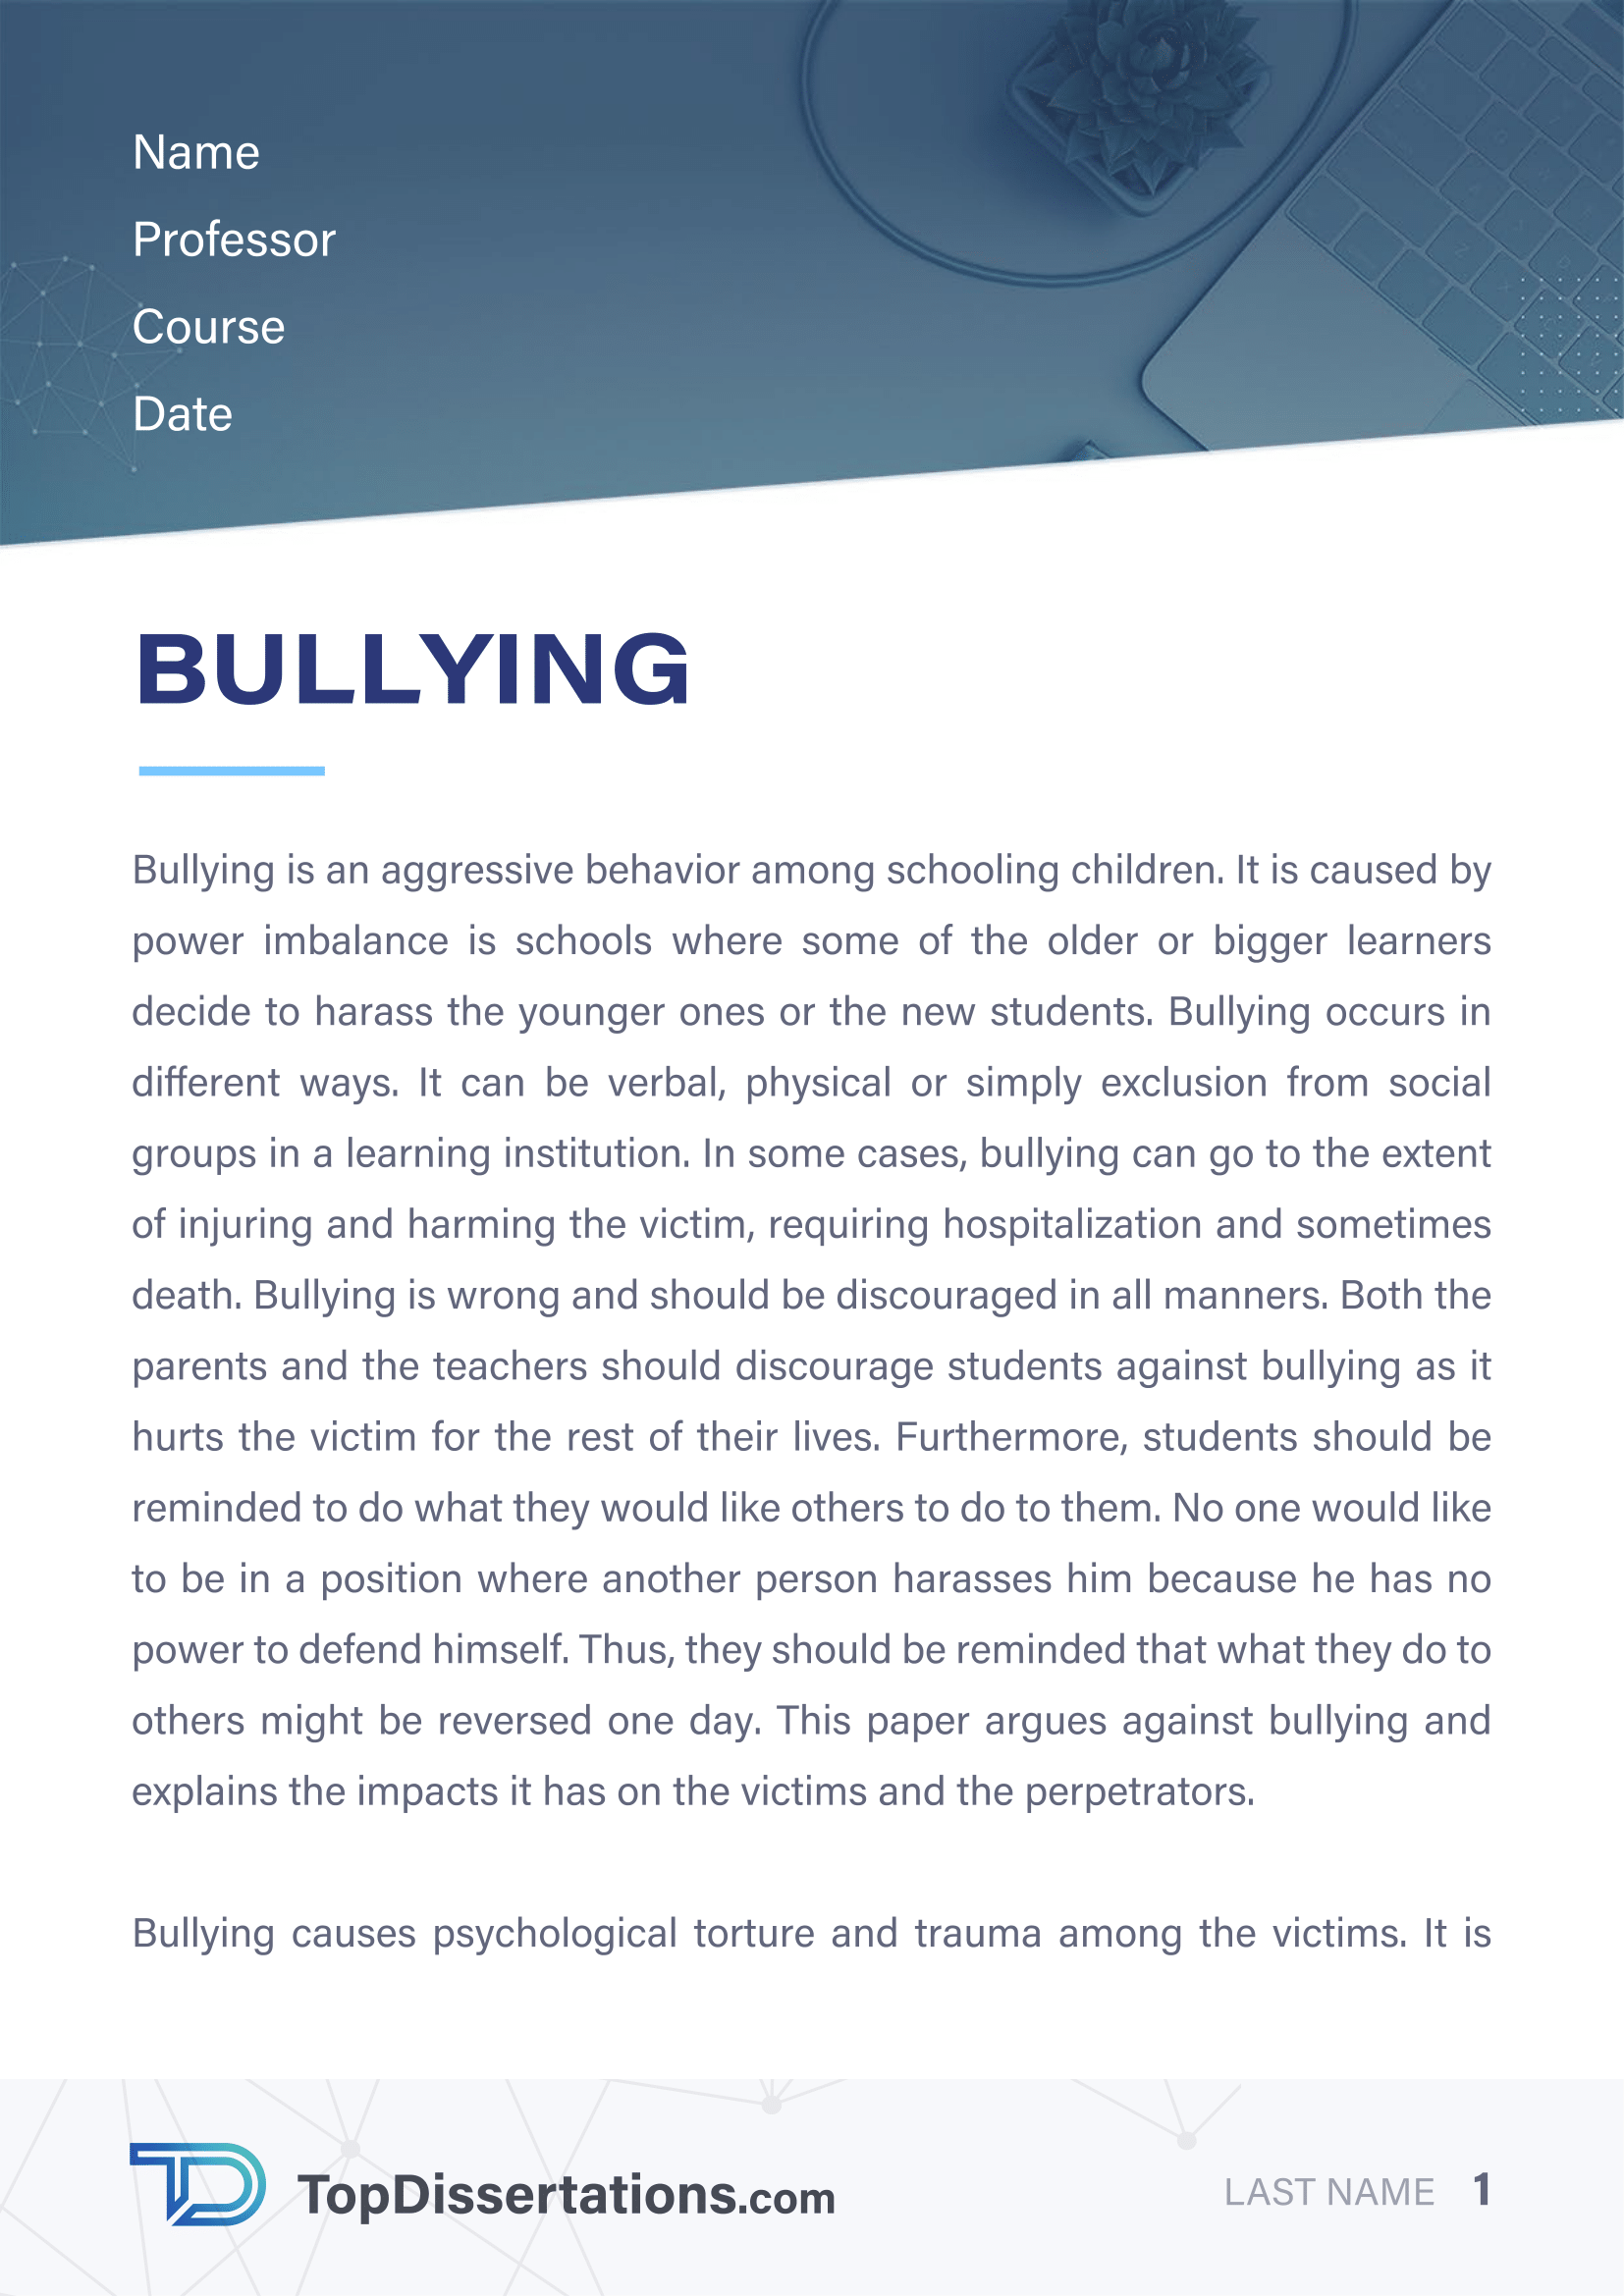 4 paragraph essay about bullying